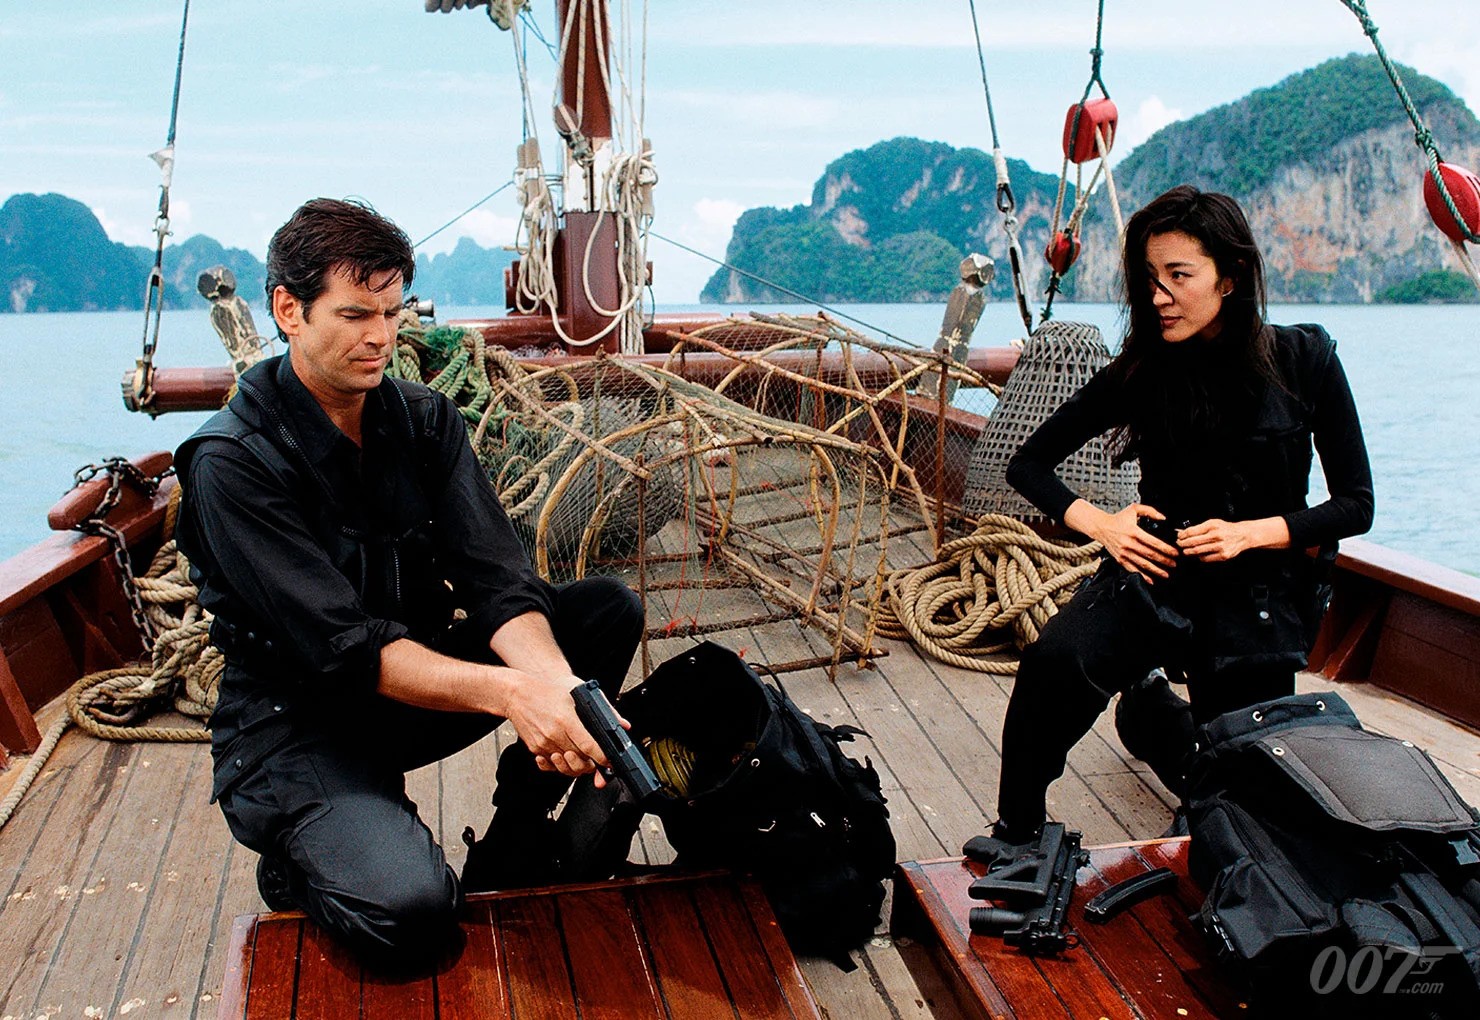 Pierce Brosnan and Michelle Yeoh in Tomorrow Never Dies [Credit: Universal Pictures/Eon Productions]